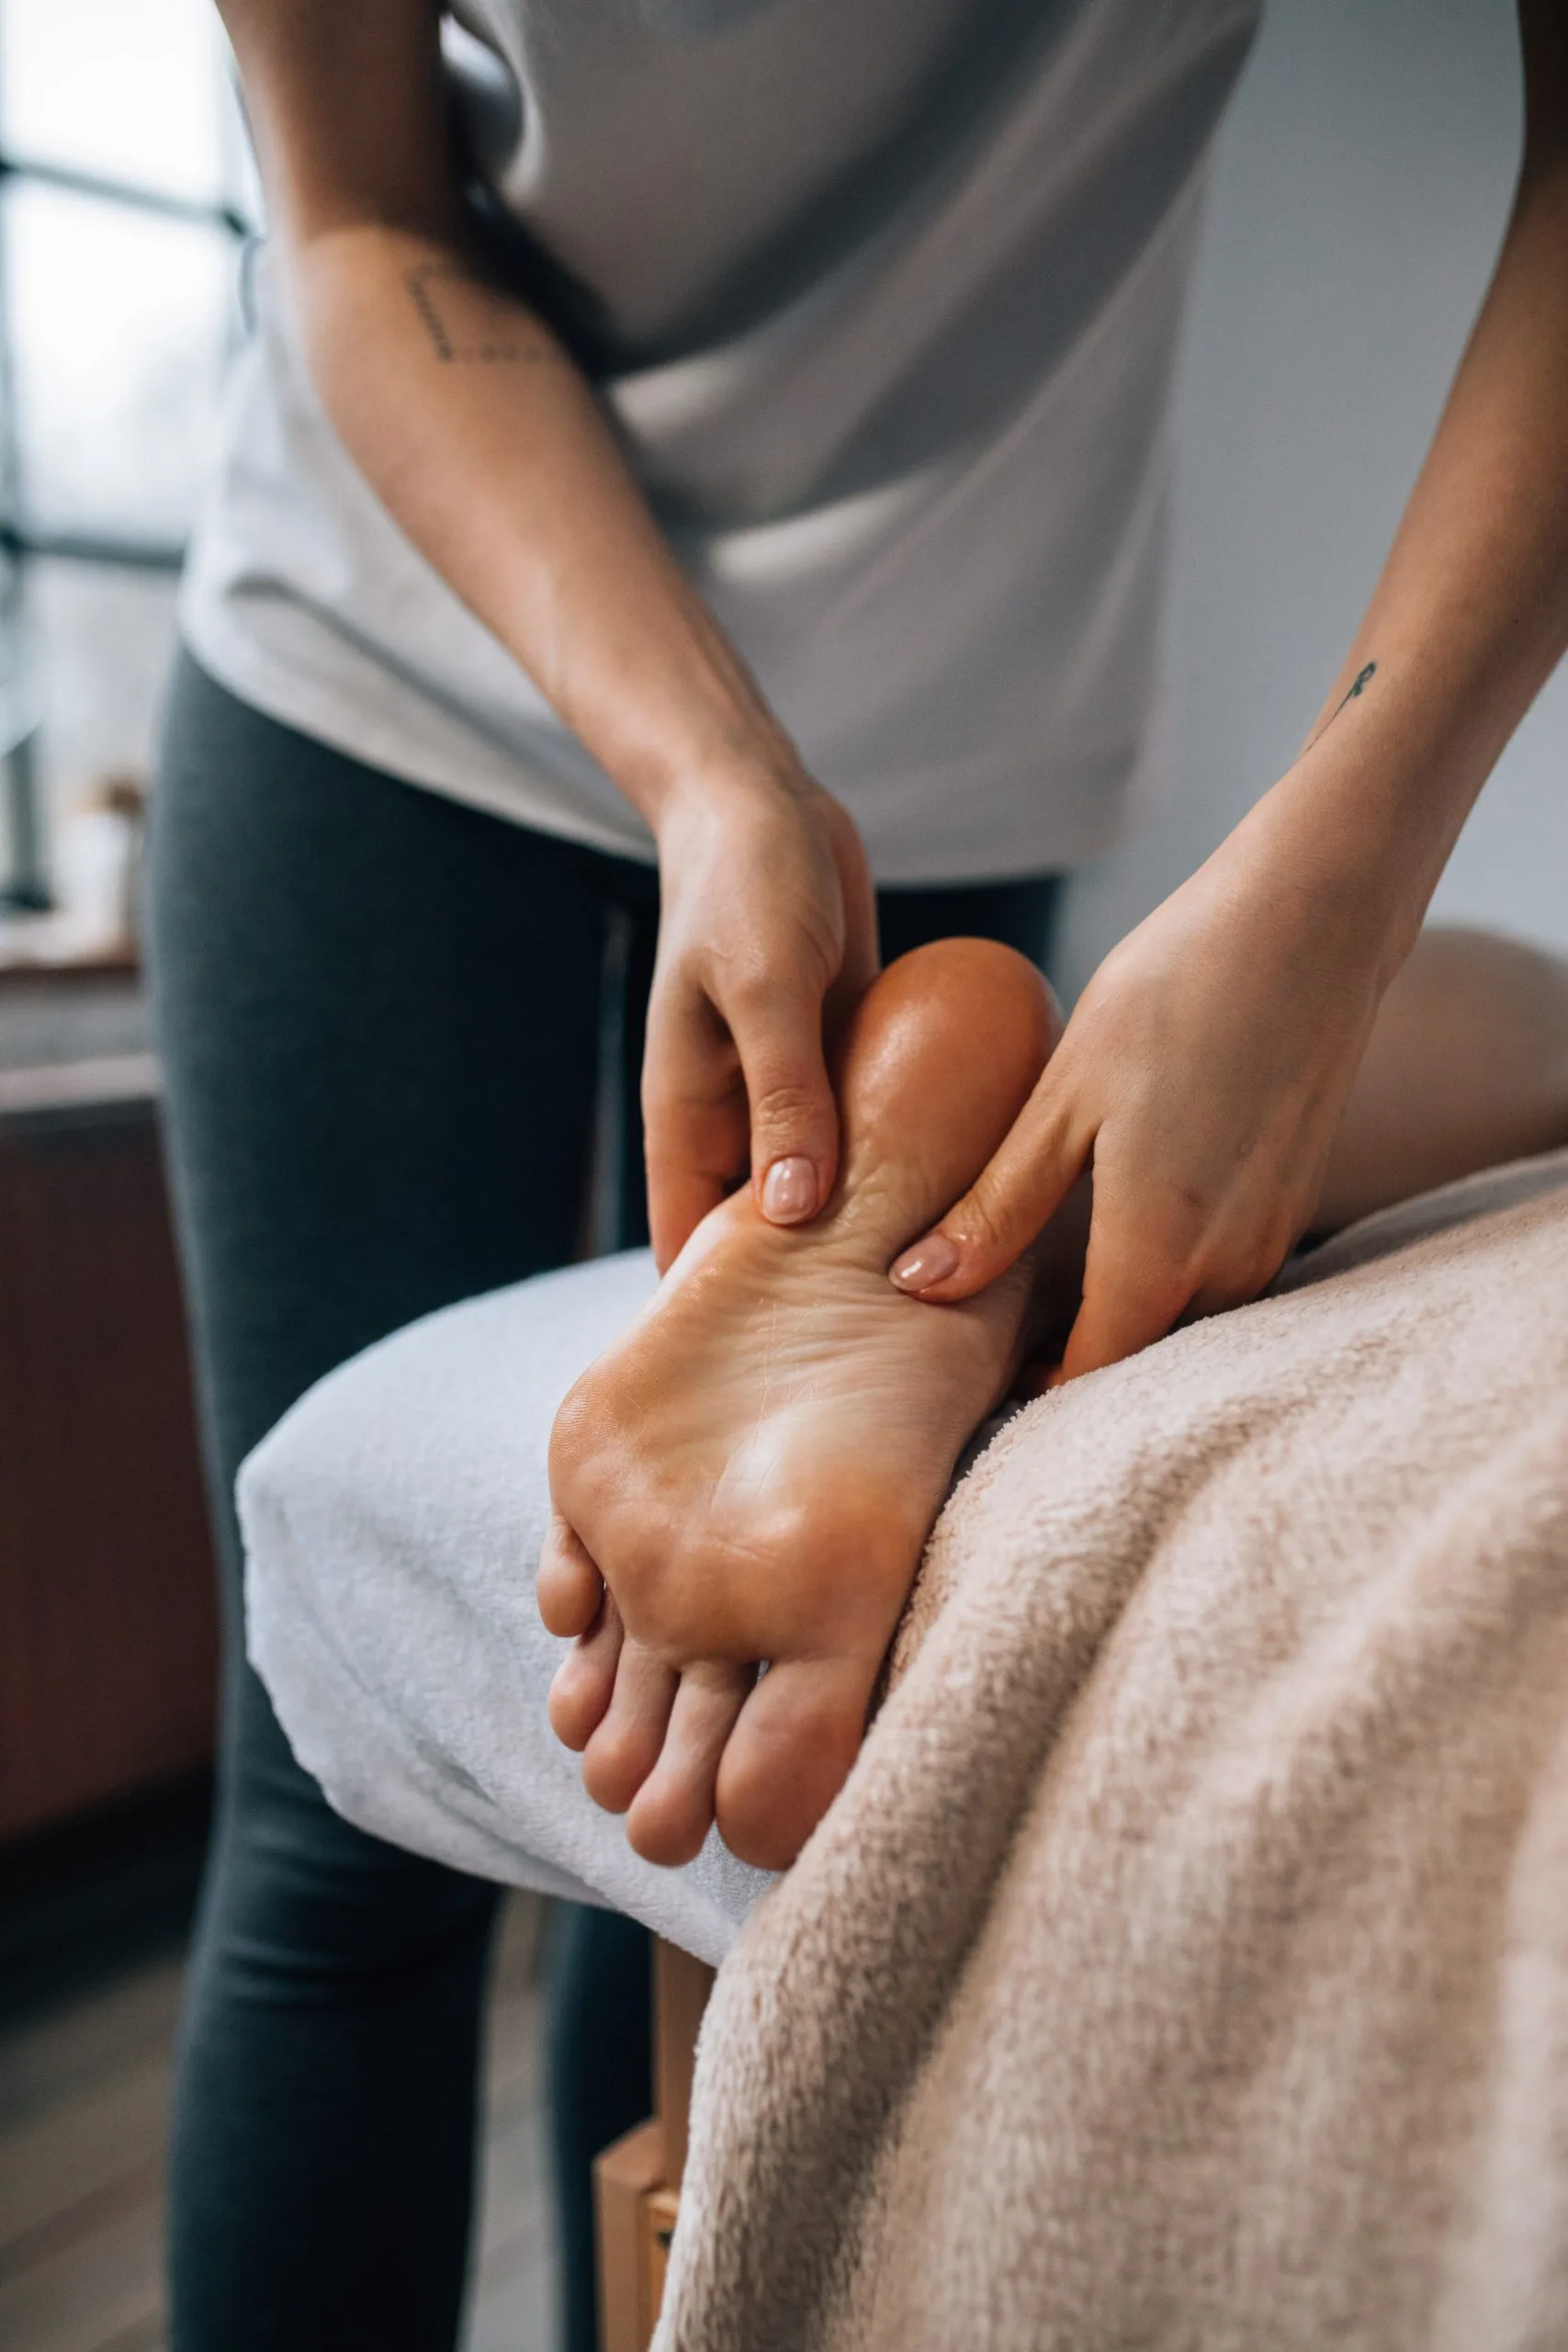 Need Some Stress Relief? Try Foot Reflexology